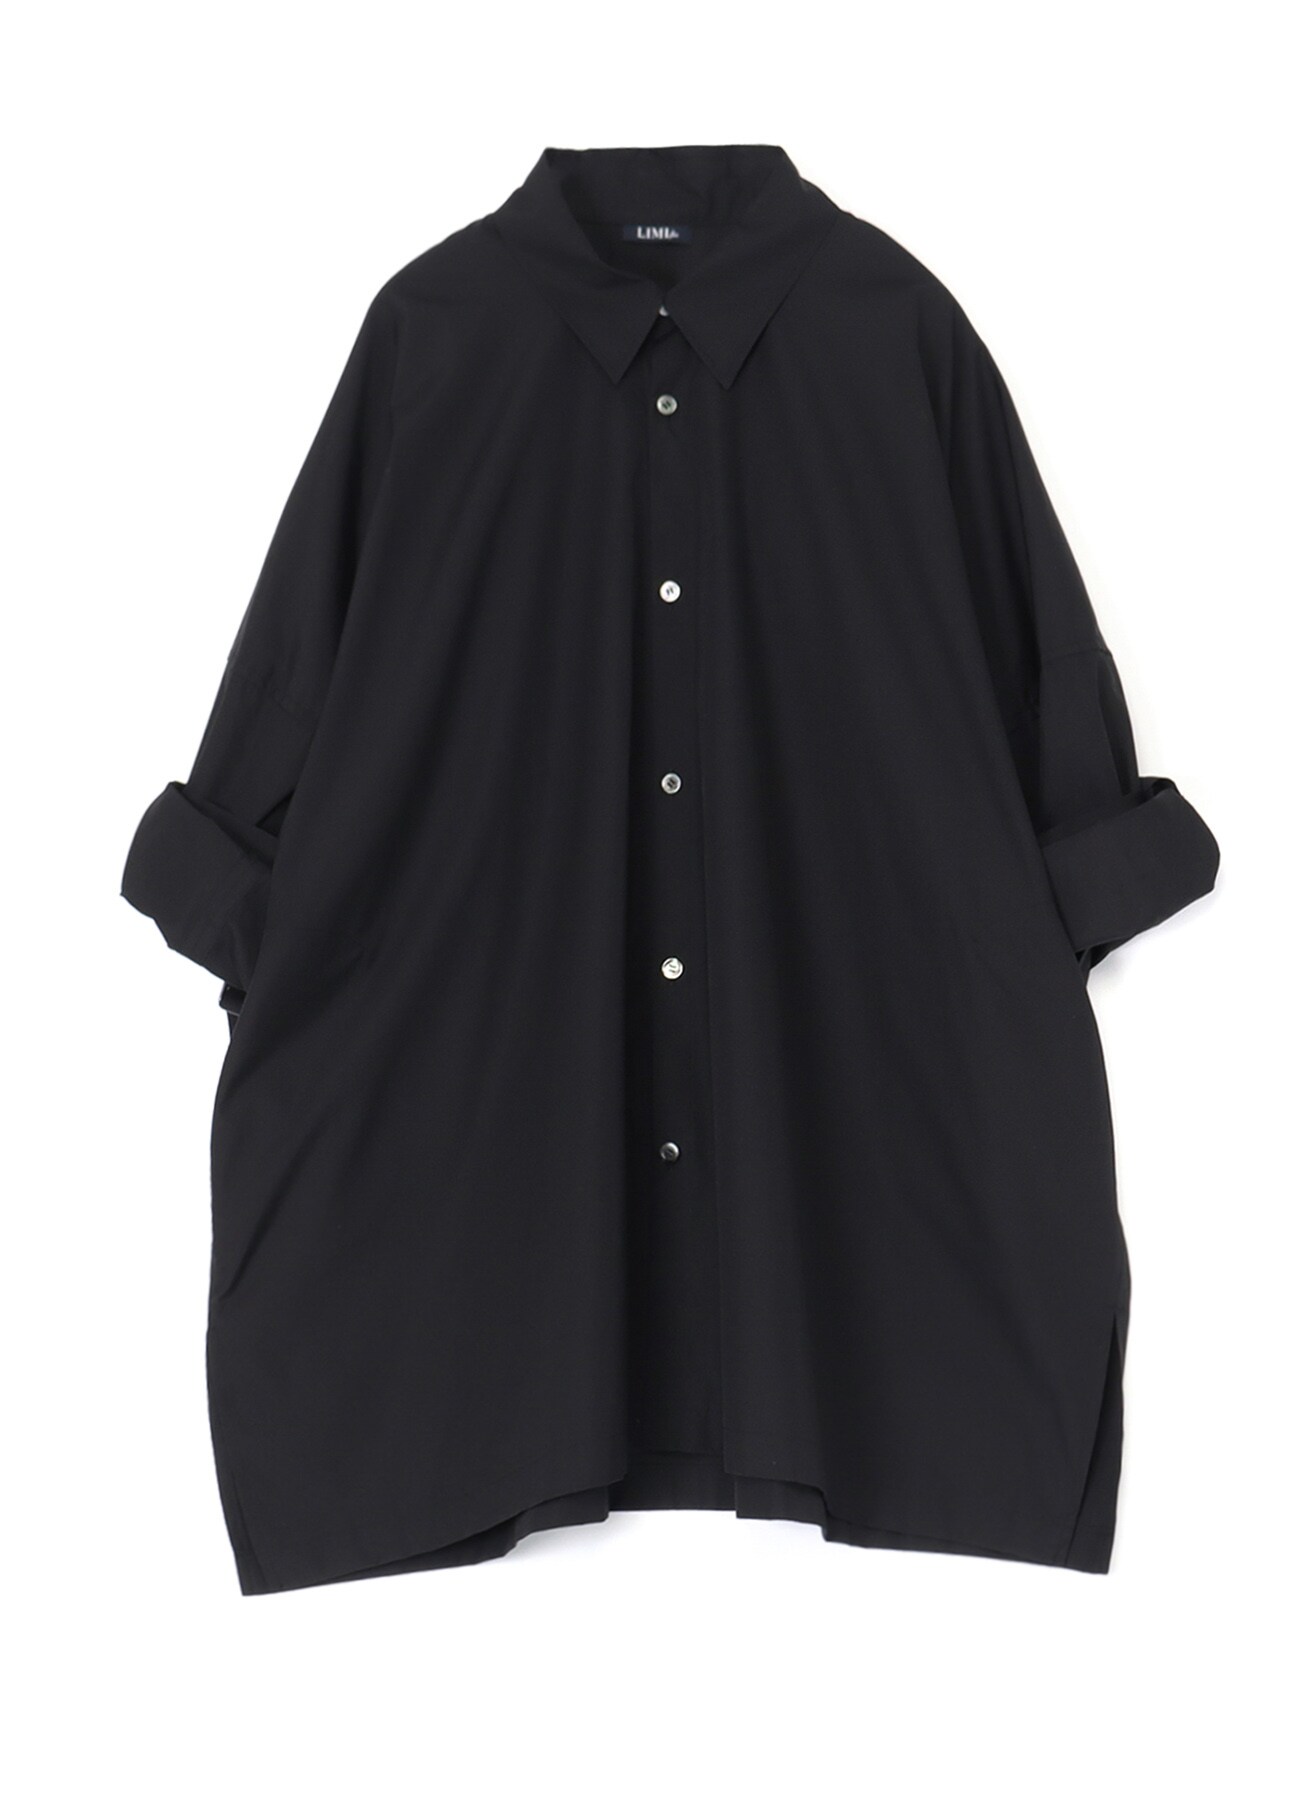 100/2 COTTON BROADCLOTH SHIRT WITH BACK BELT DETAIL